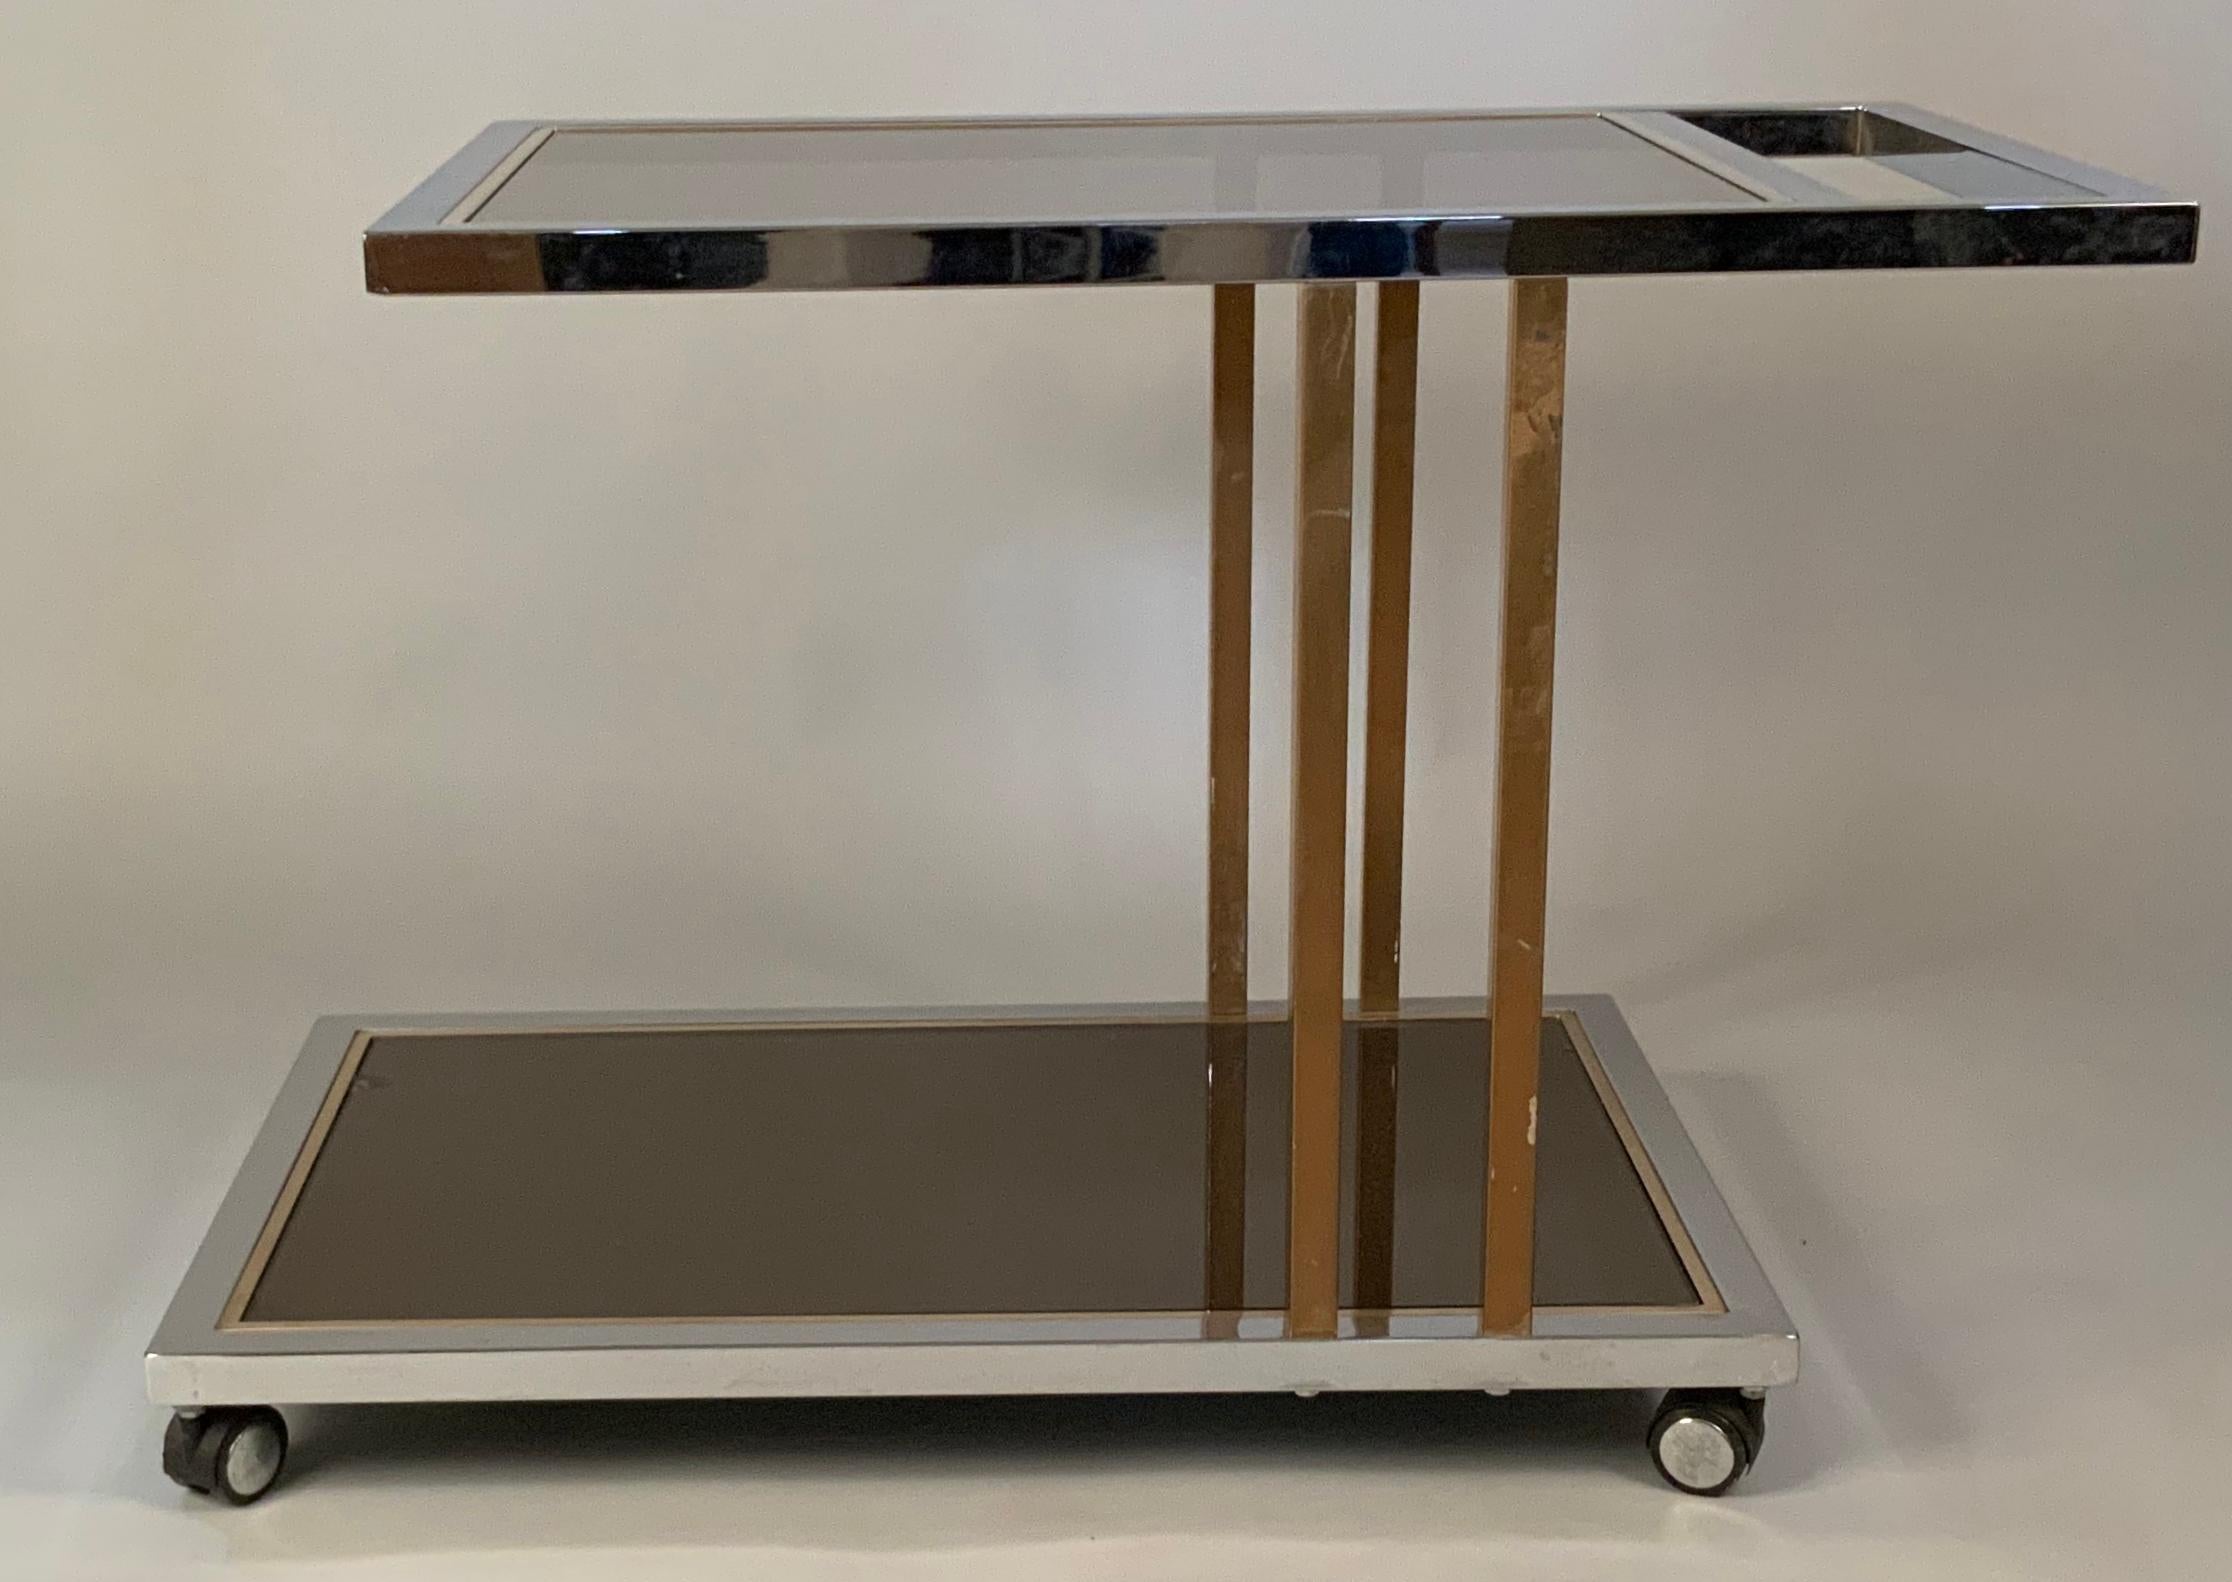 A very handsome modern 1970's rolling bar cart, with a frame of chrome and vertical bars with a brass finish. The two levels have smoked glass shelves. beautiful and functional design, with an integrated handle at one end, and the lower shelf